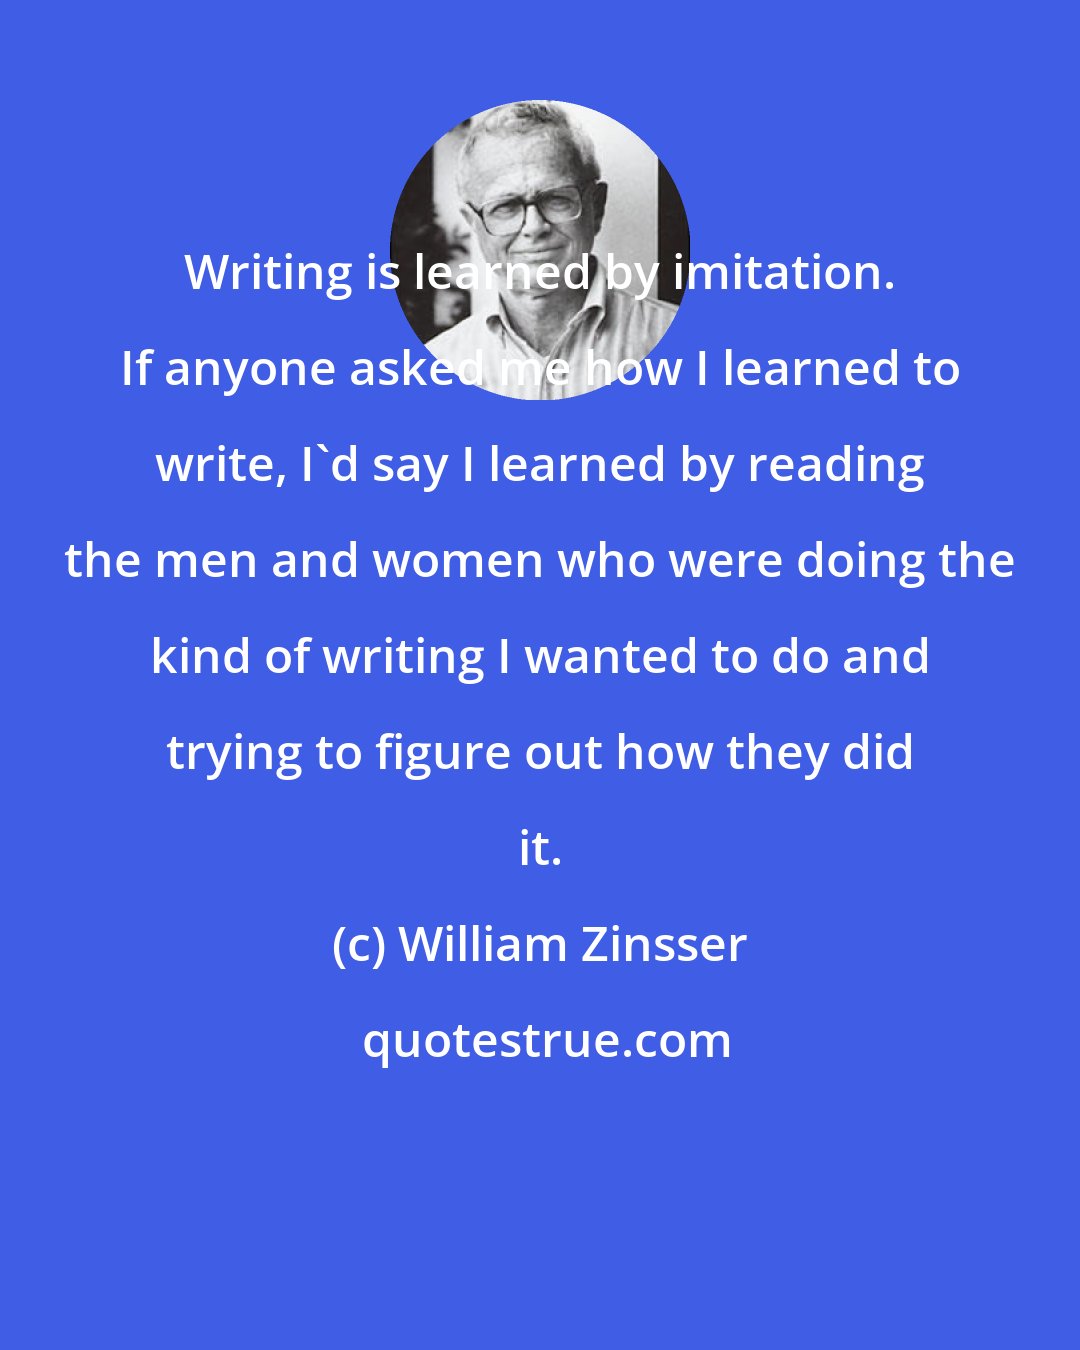 William Zinsser: Writing is learned by imitation. If anyone asked me how I learned to write, I'd say I learned by reading the men and women who were doing the kind of writing I wanted to do and trying to figure out how they did it.